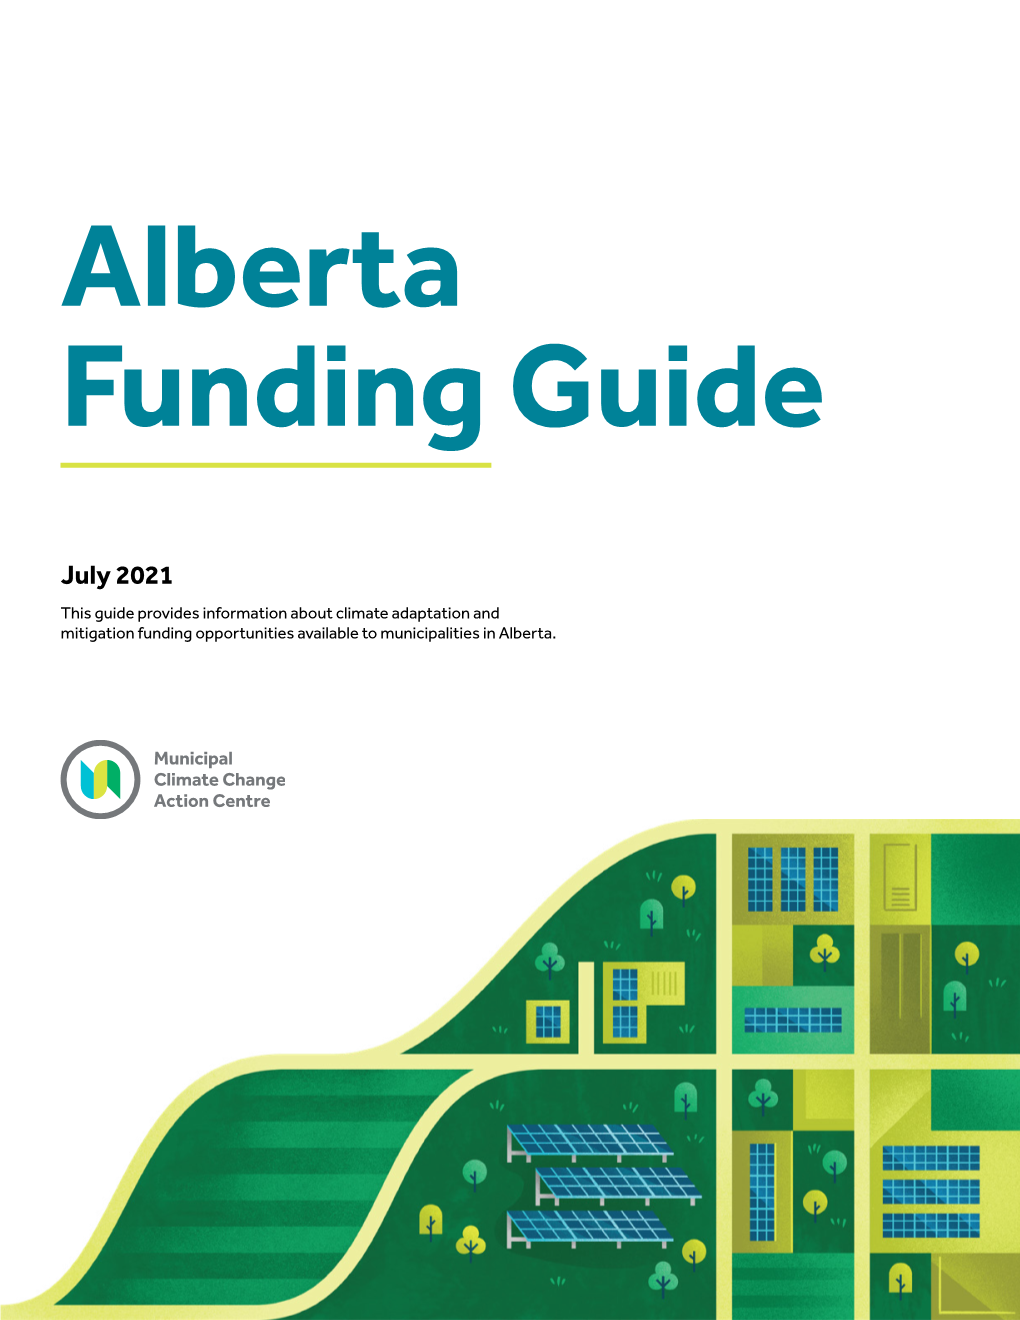 July 2021 Funding Guide